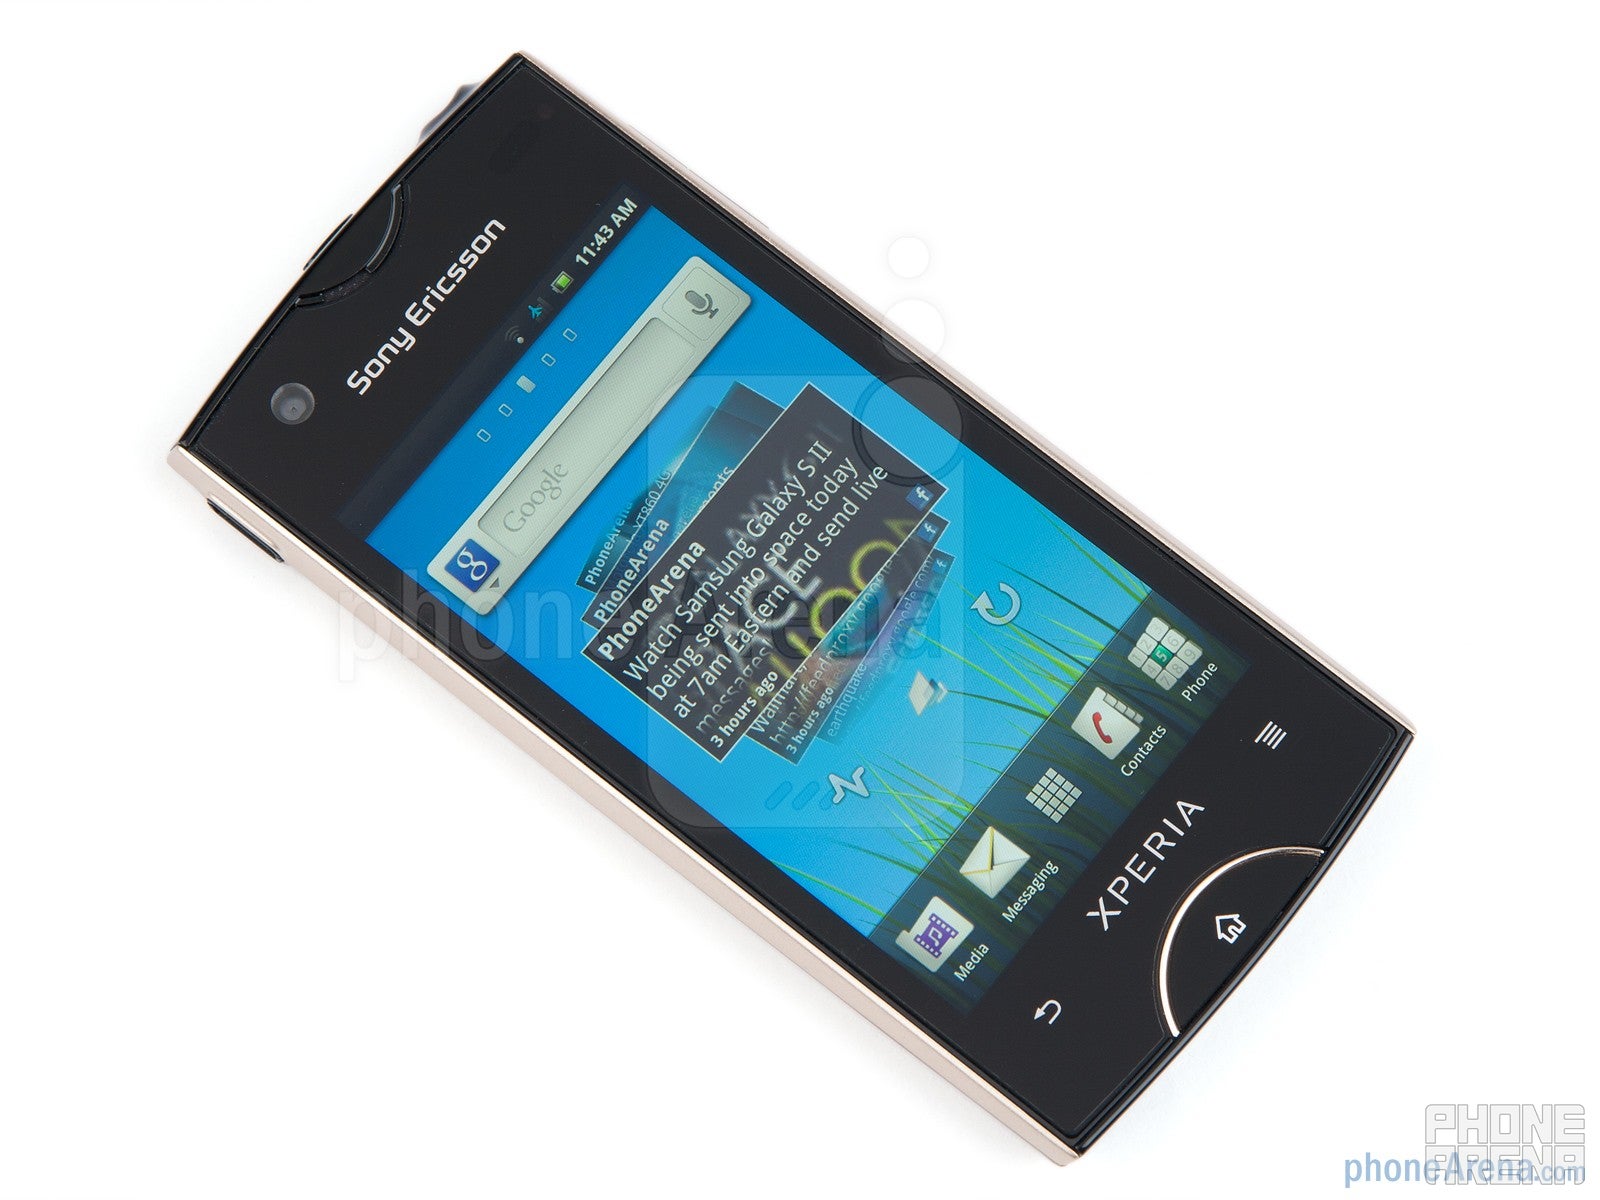 Sony Ericsson Xperia ray Preview